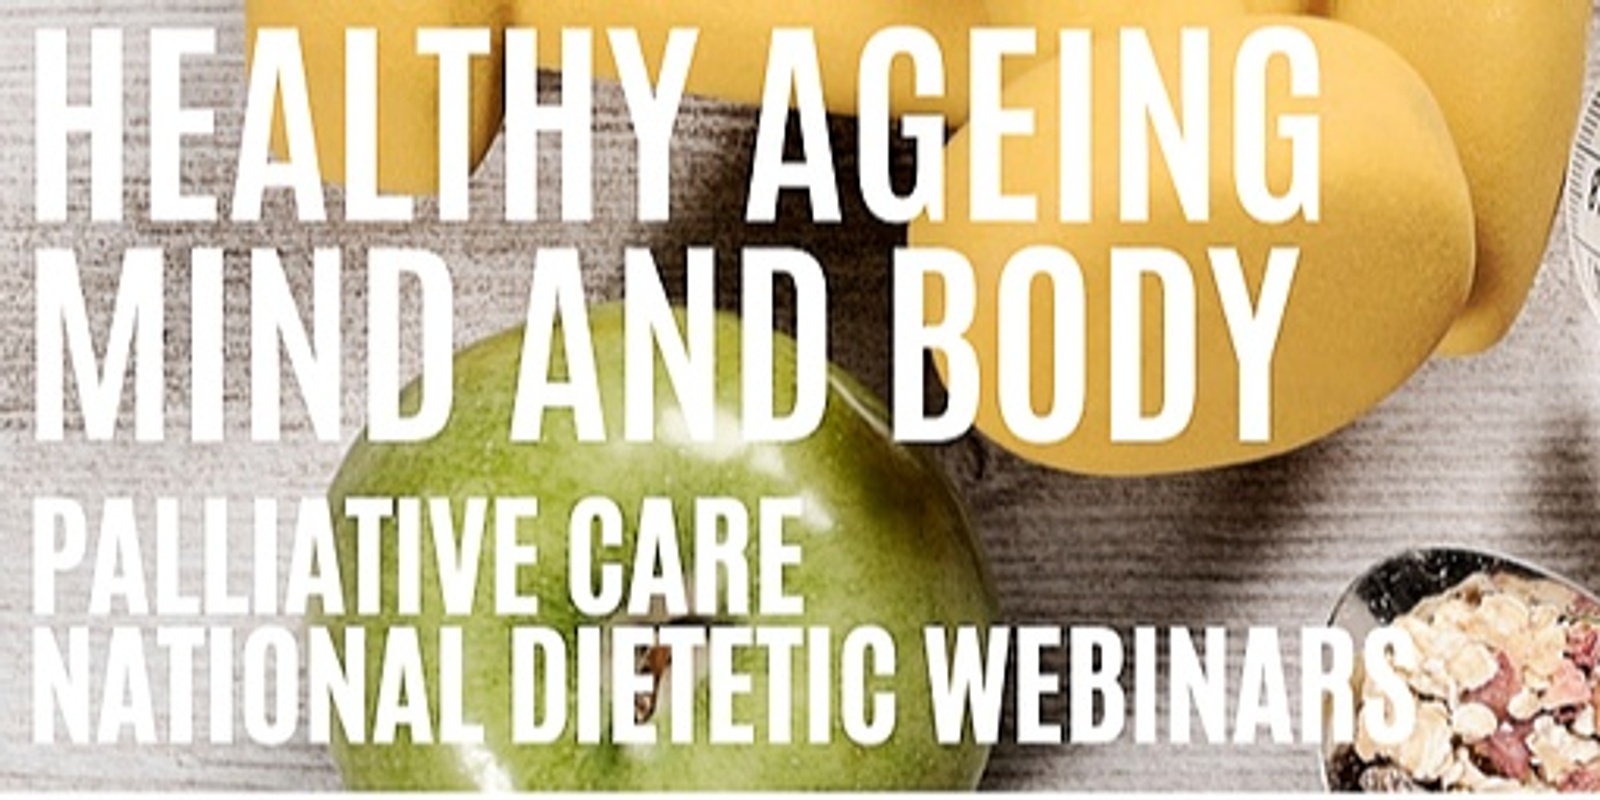 Banner image for National Dietetic Webinar - Topic 1. Healthy Ageing – Mind and Body